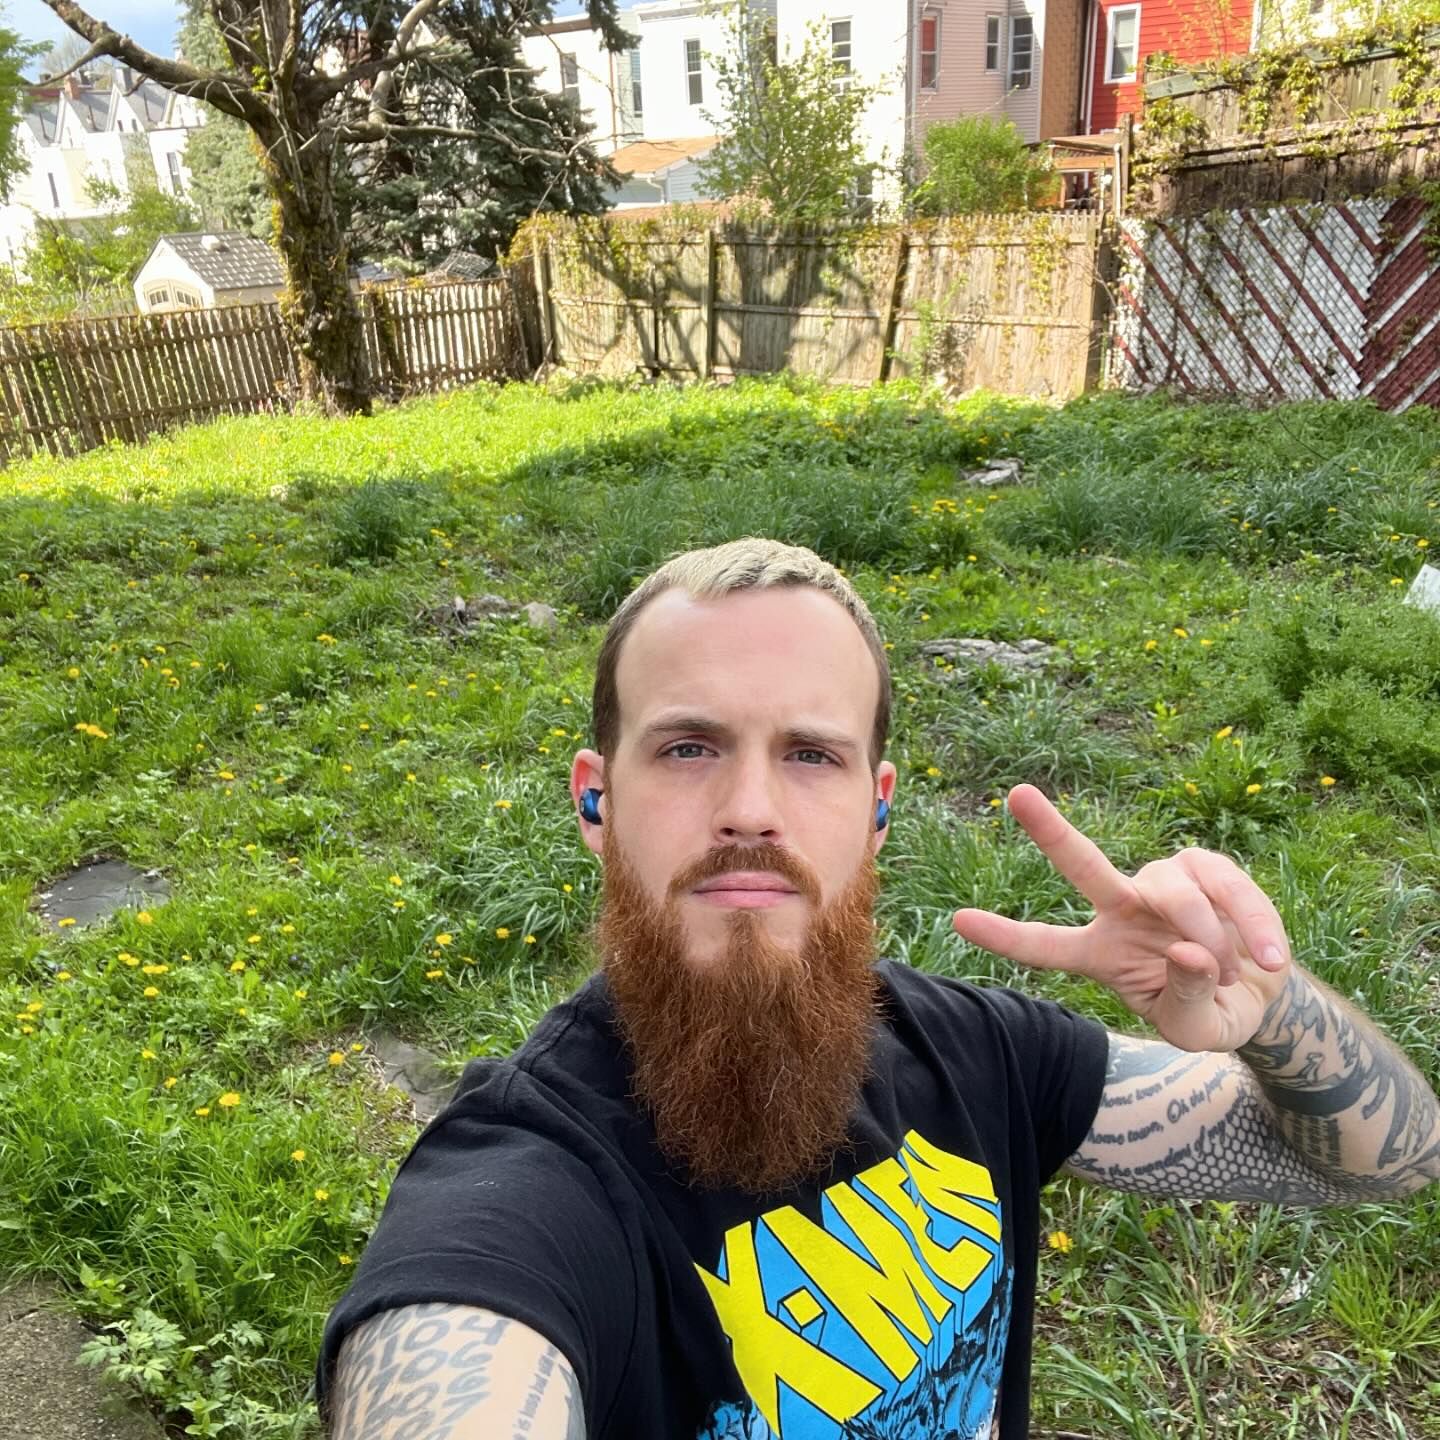 I’ve lived in my building for 9 years and one big RAGERT I have is that I’ve never been able to stick to transforming the surprisingly large backyard to make it a lil cuter and more usable. It’s got a lot of issues that I’ve realized are difficult to tackle solo when you’re also tackling physical BS, BUT I paid a lil visit back there this week to appreciate her as she is right now. Lots of native plants and memories of work I’ve done ❤️ 

1. Derp 🤠 Ask me about my X-Men fanfic character
2. It’s big!
3. Some blooming moss 😍
4. Grass has grown through this window screen, so much so that I couldn’t even lift it up! #natureishealing 
5. Couple years ago some BIG branches fell into the yard so I cleaned them up and made an f-slur I mean bundle of sticks

6. The top layer of basically the whole yard is filled with rocks, tile, old wall pieces, glass, and metal from prior construction inside the building. Even while I’ve lived here I’ve witnessed the VERY STUPID BAD practice of contractors dumping all sorts of debris (🐈‍⬛) while they work, and it was one of the main factors why I’ve given up before. It’s exhausting trying to clean that shit out. 😫 BUT I’ve made several cute piles and increased border security with a lot of larger rocks.

7. My FAVORITE weed (aside from the devil’s lettuce) is #GaliumAparine aka Cleavers or Catchweed and I remember making little Miss America sashes out of them or throwing them at each other when I was a wee one ❤️ and there’s LOTS of it back here! She even caught some trash lol

8. I’ve thought of this tree as a SCOURGE, a dead thing housing wasps that I’d have to call the city to chop down before it collapses. BUT! It’s got some young branches shooting out and #CarolinaCreepers climbing up the trunk, and I remembered, trees are here with us, not against us. And she’s not done being alive! 🌱

9. First #Ladybug of the season 🥰🥰🥰🥰
10. Not sure how well it shows on camera, but there’s also some WILD mounds and unevenness I’m not sure how to tackle without a team, but you can also see some PRIME growing space 😍 

Let’s see if I can make it any better this spring :) 🌸